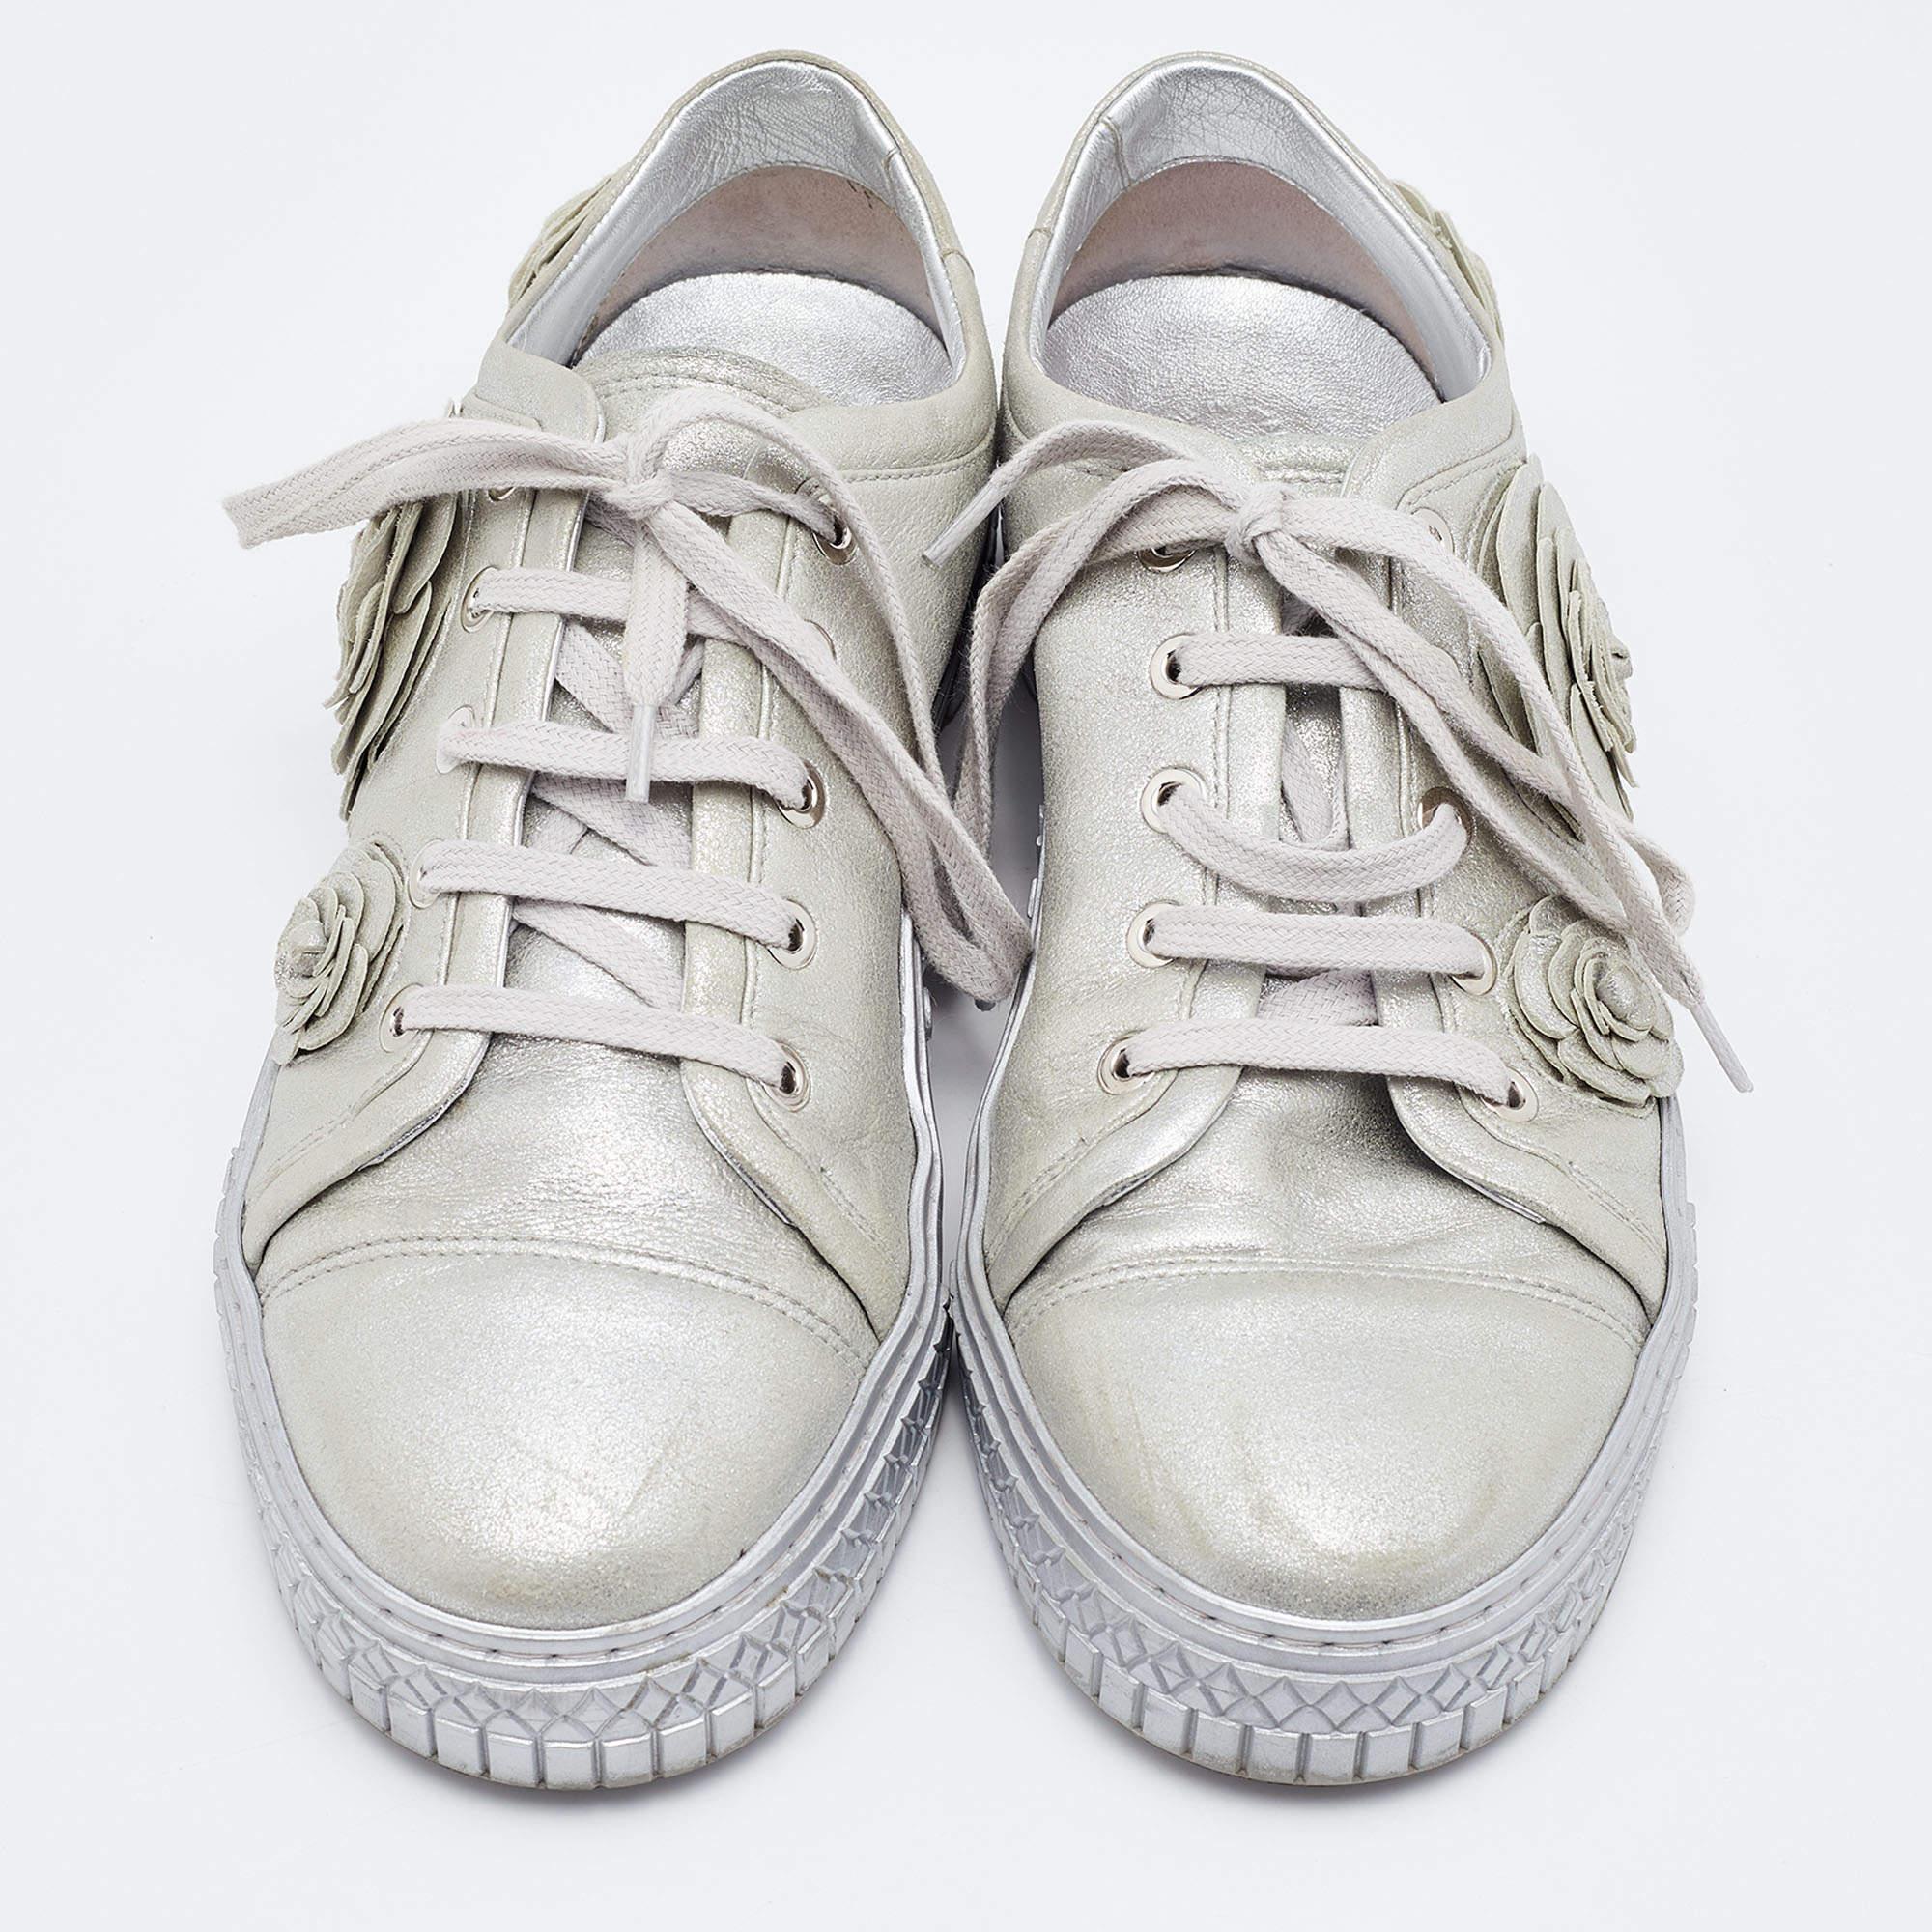 Let this comfortable pair be your first choice when you're out for a long day. These Chanel sneakers for women have well-sewn uppers beautifully set on durable soles.

Includes: Original Dustbag, Original Box
